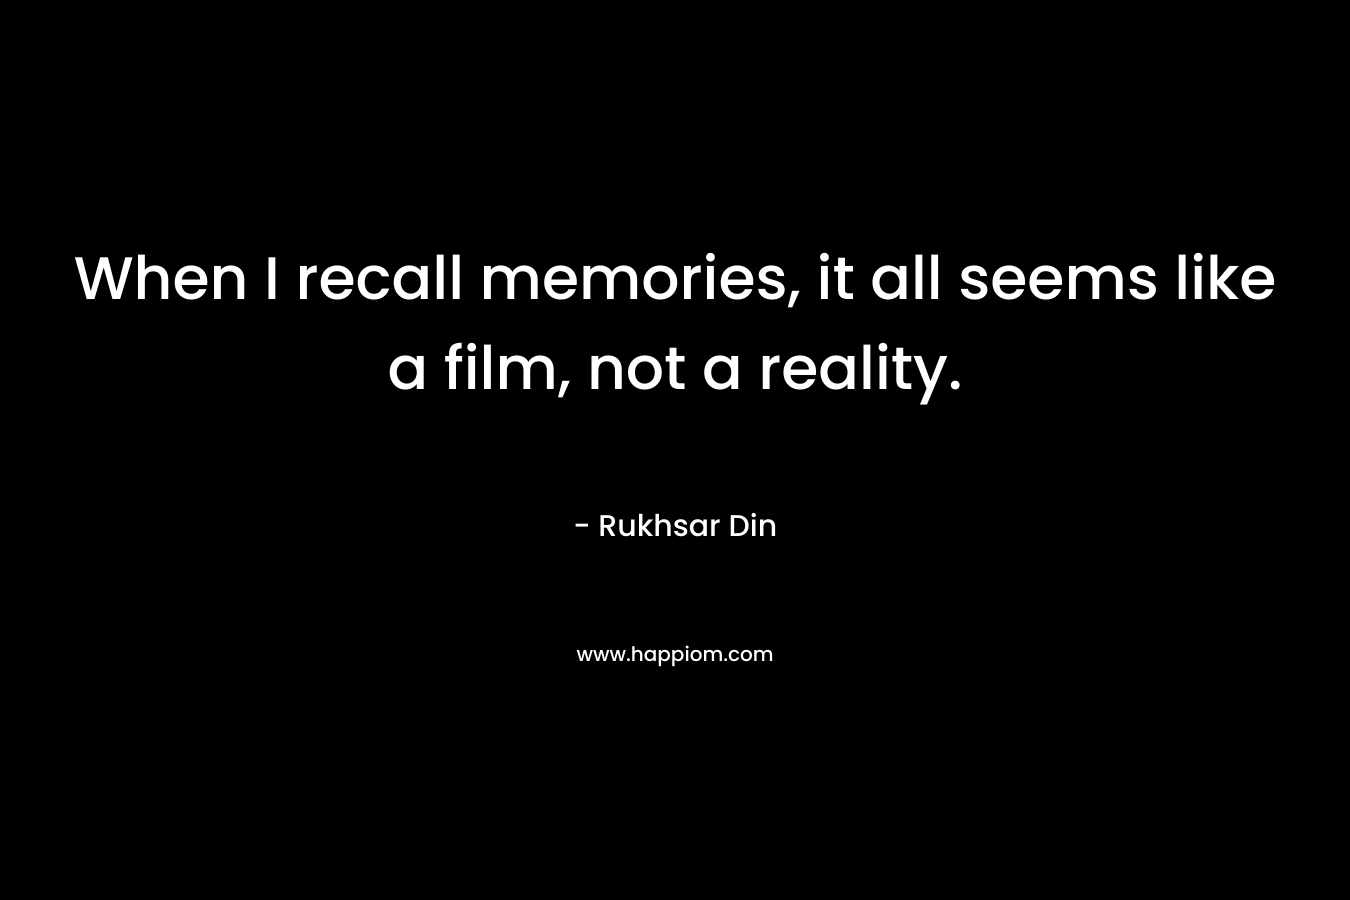 When I recall memories, it all seems like a film, not a reality.